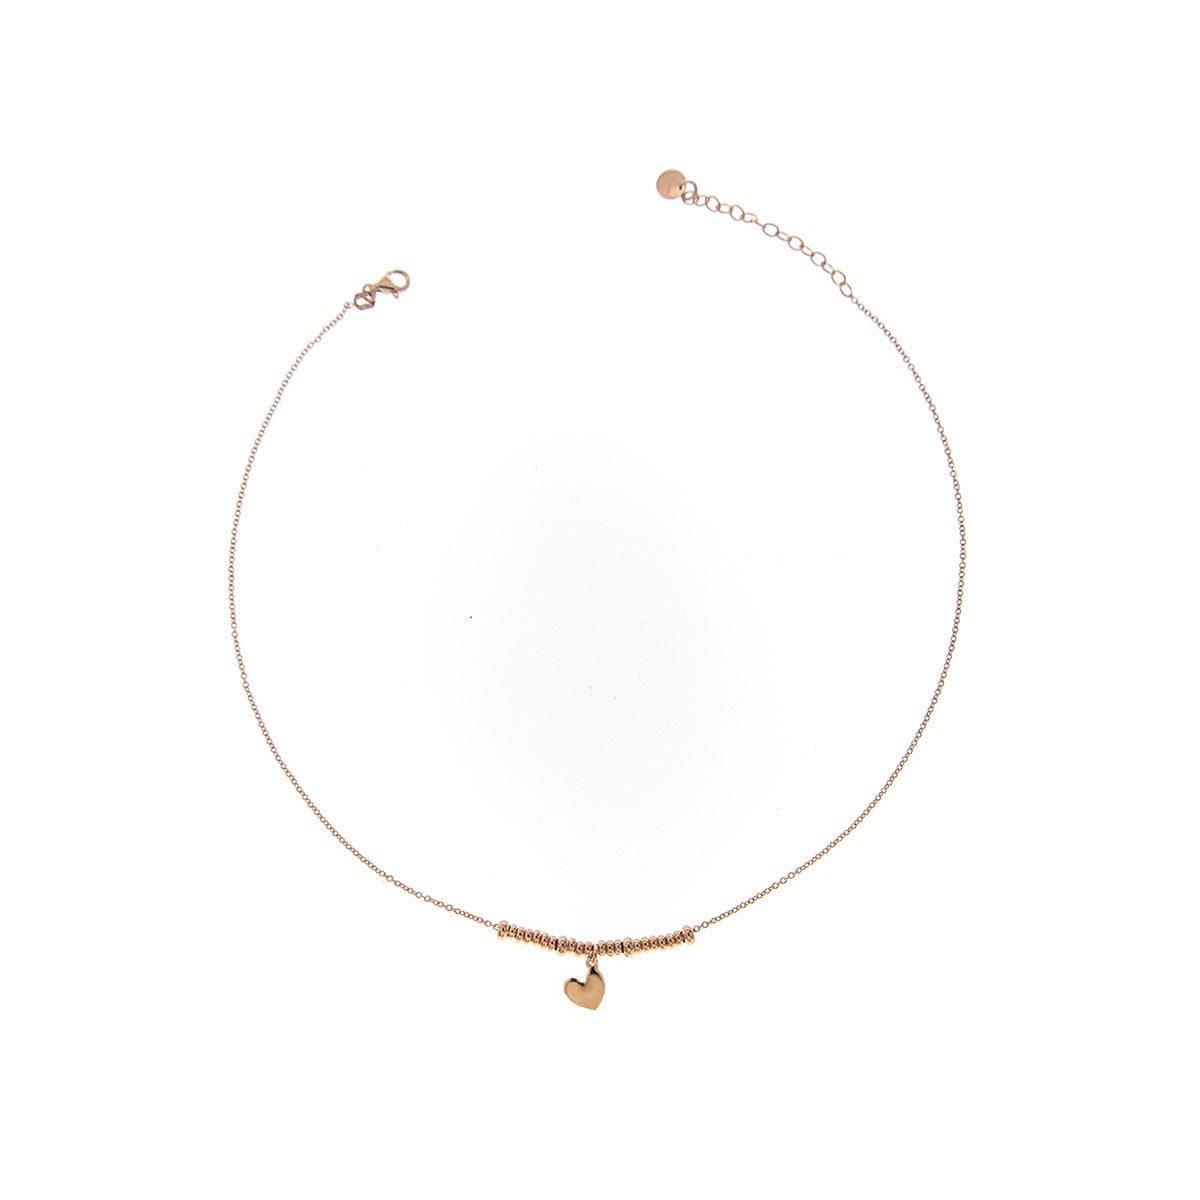 RUE DES MILLE - Heart micro rings necklace